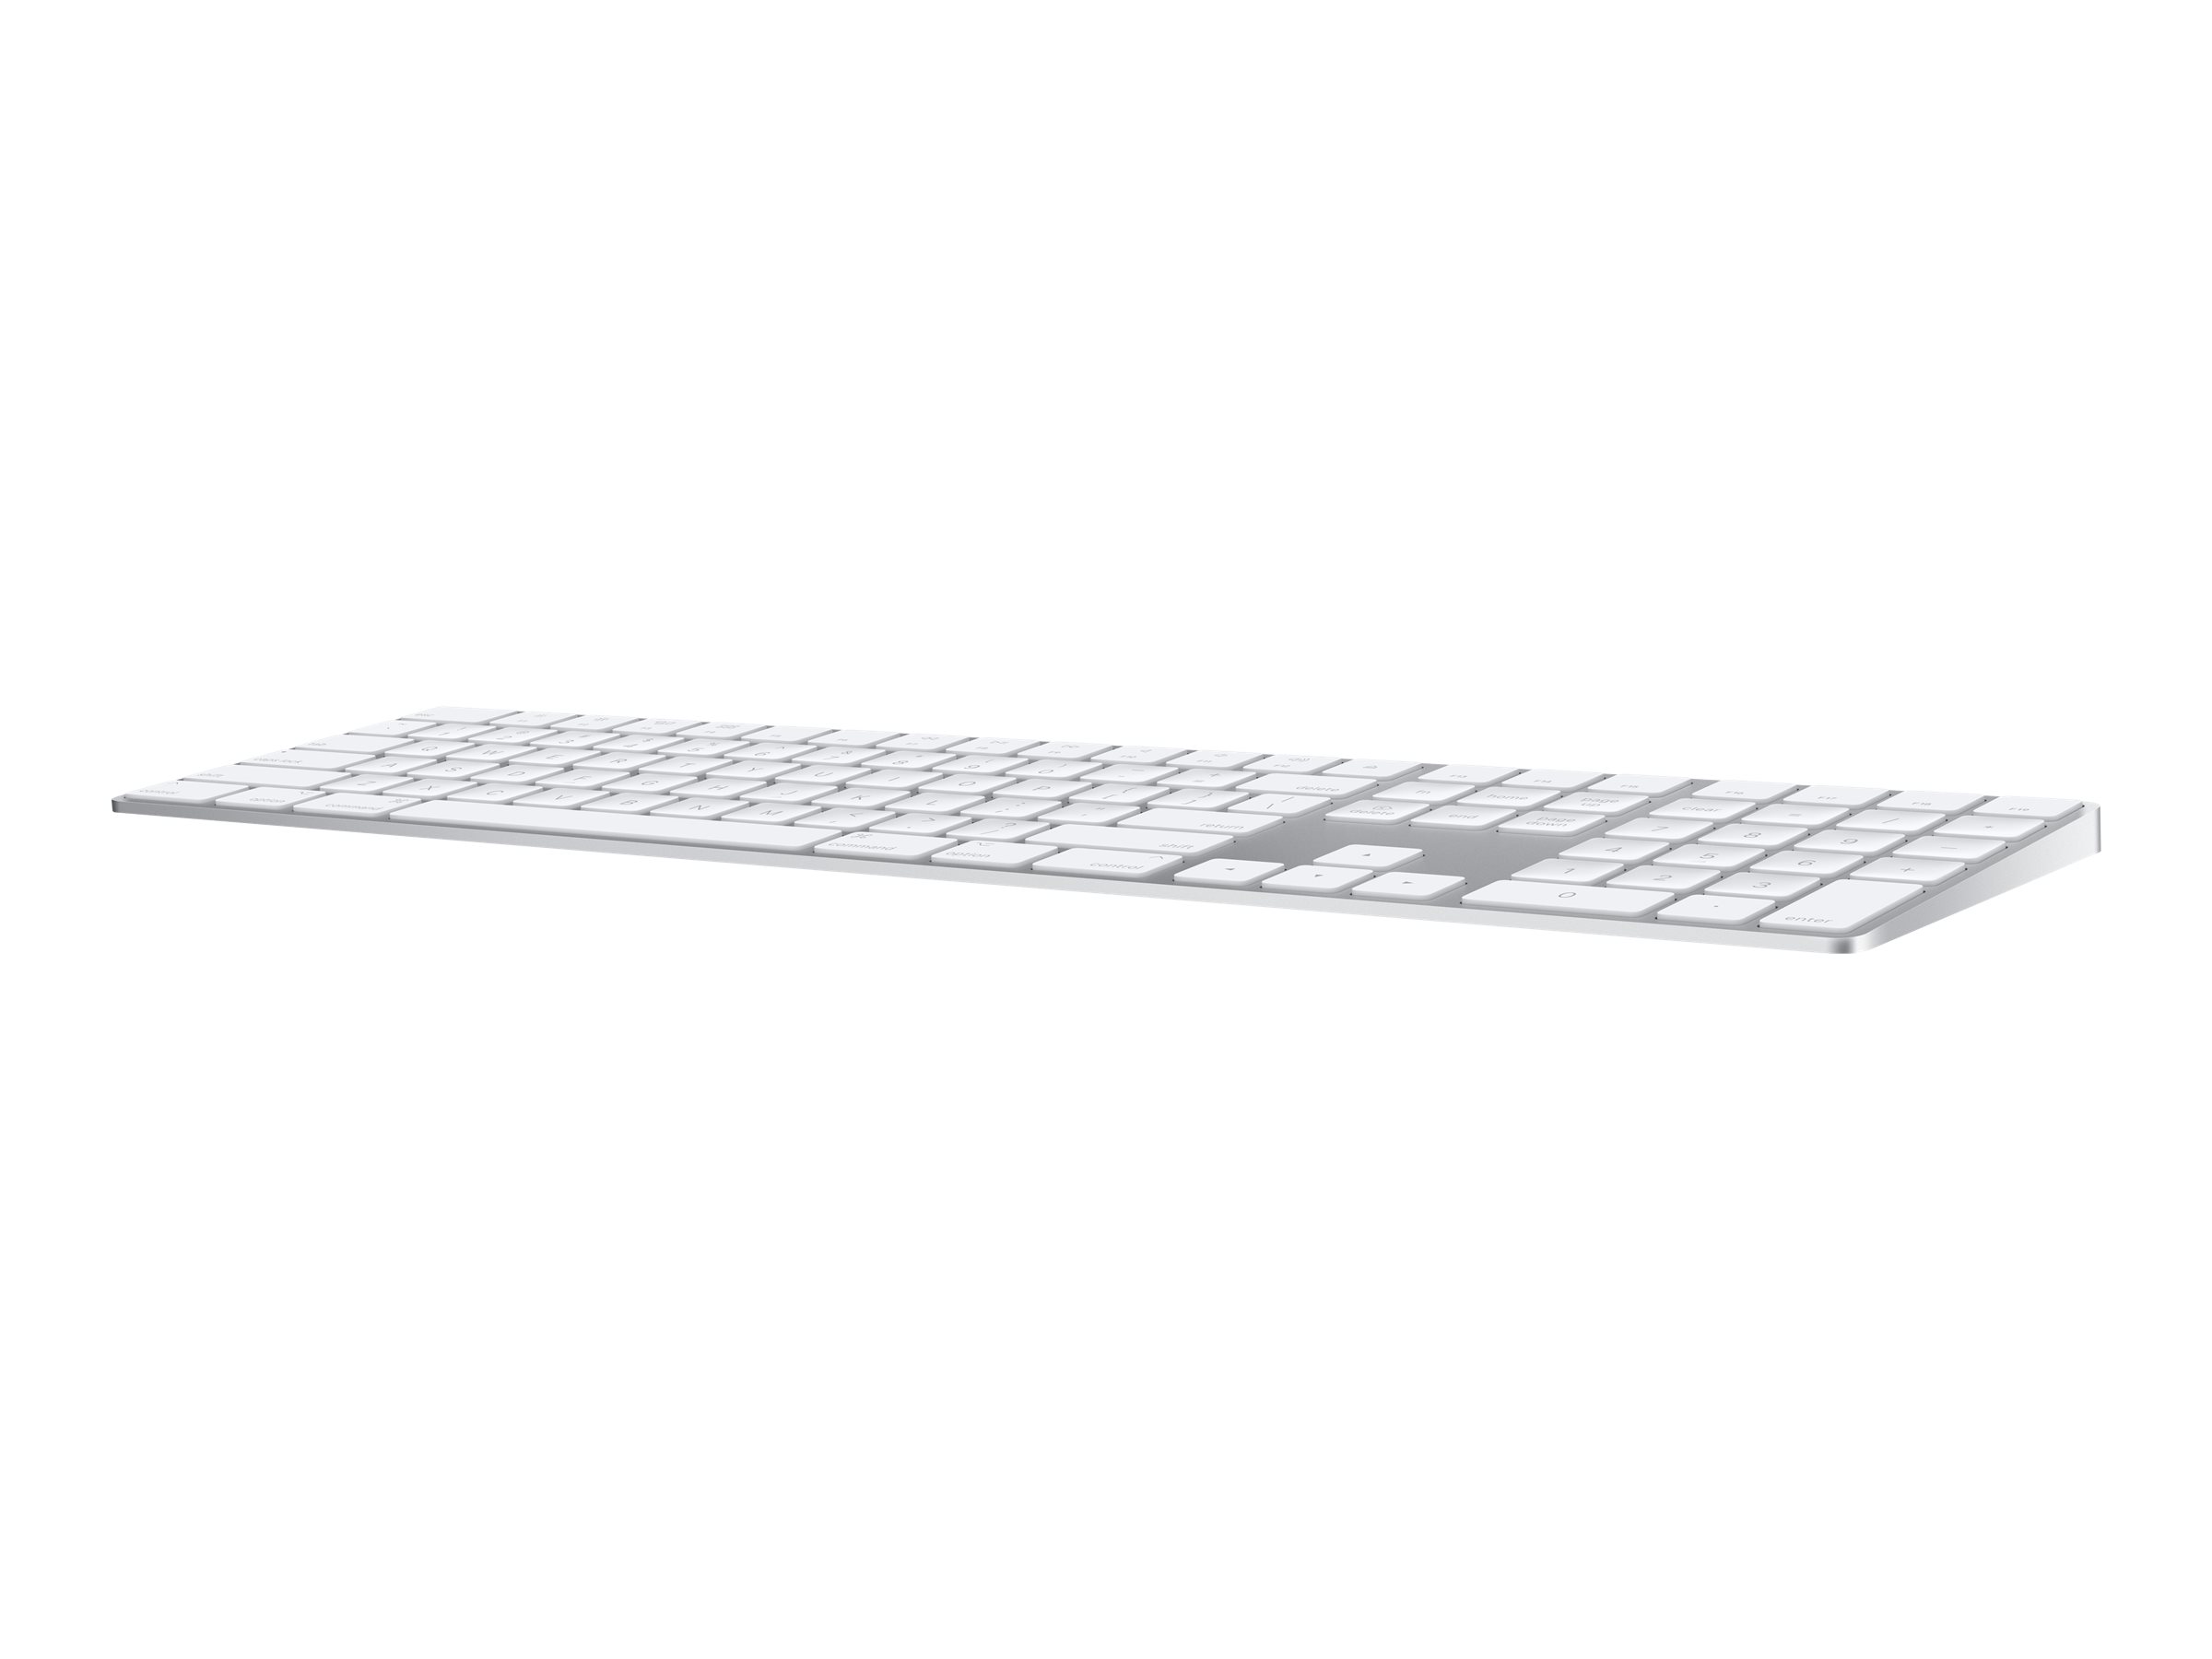 Apple Magic Keyboard with Numeric Keypad - Clavier - Bluetooth - Suédois - argent - MQ052S/A - Claviers